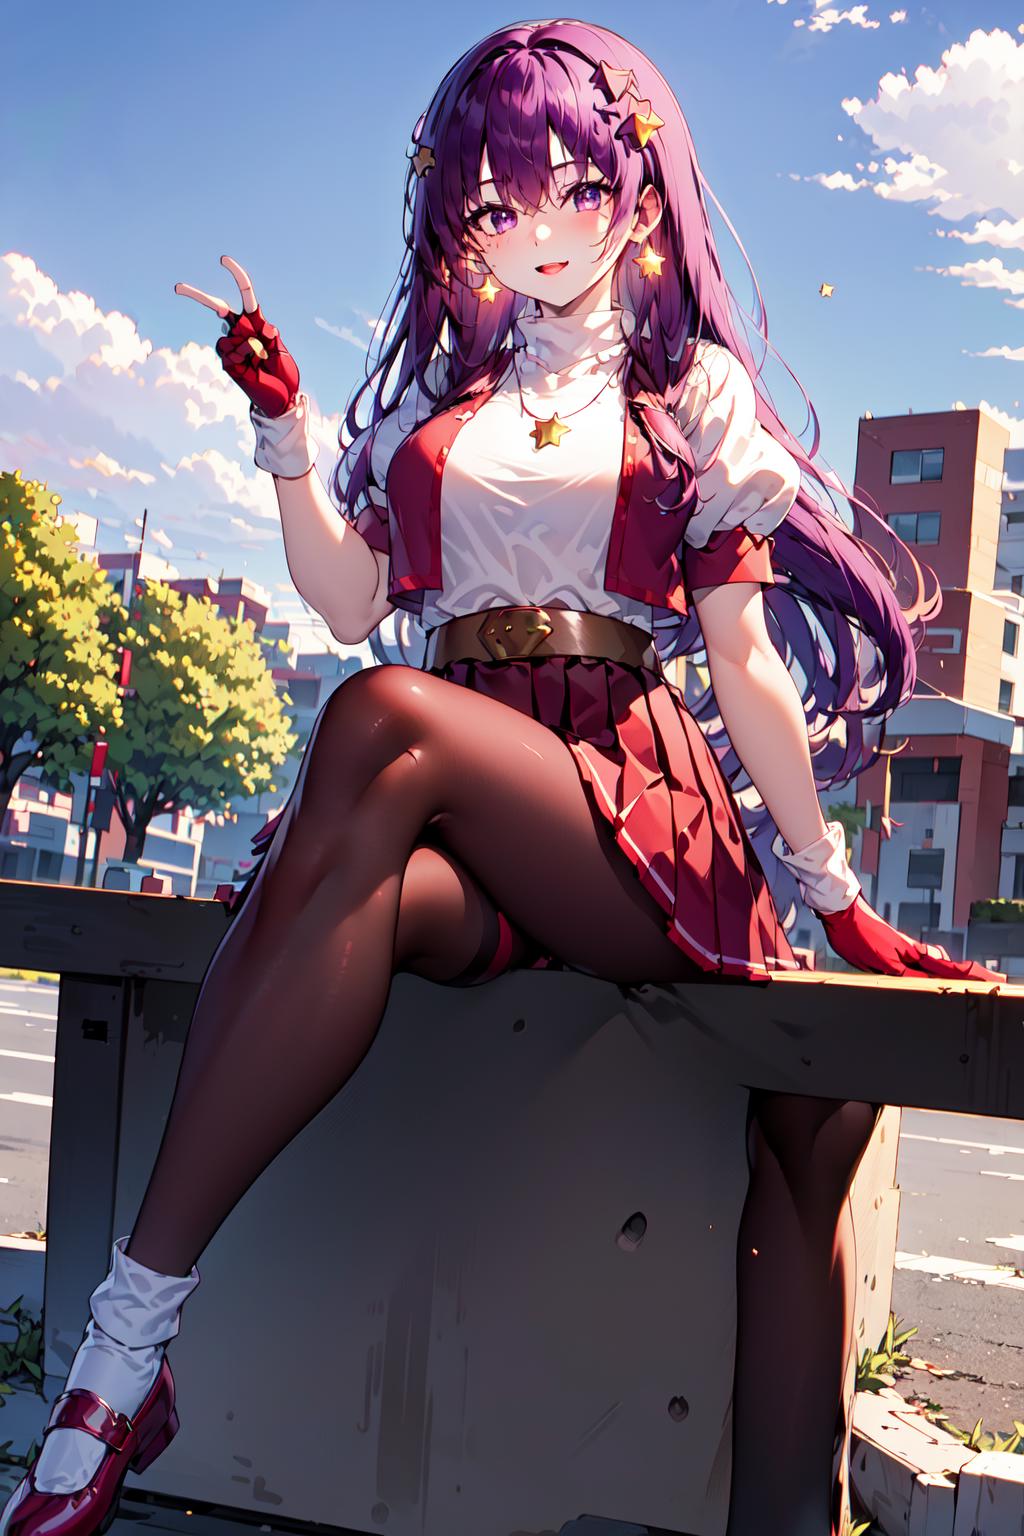 Athena Asamiya 97 麻宮アテナ / The King of Fighters image by sdf1887